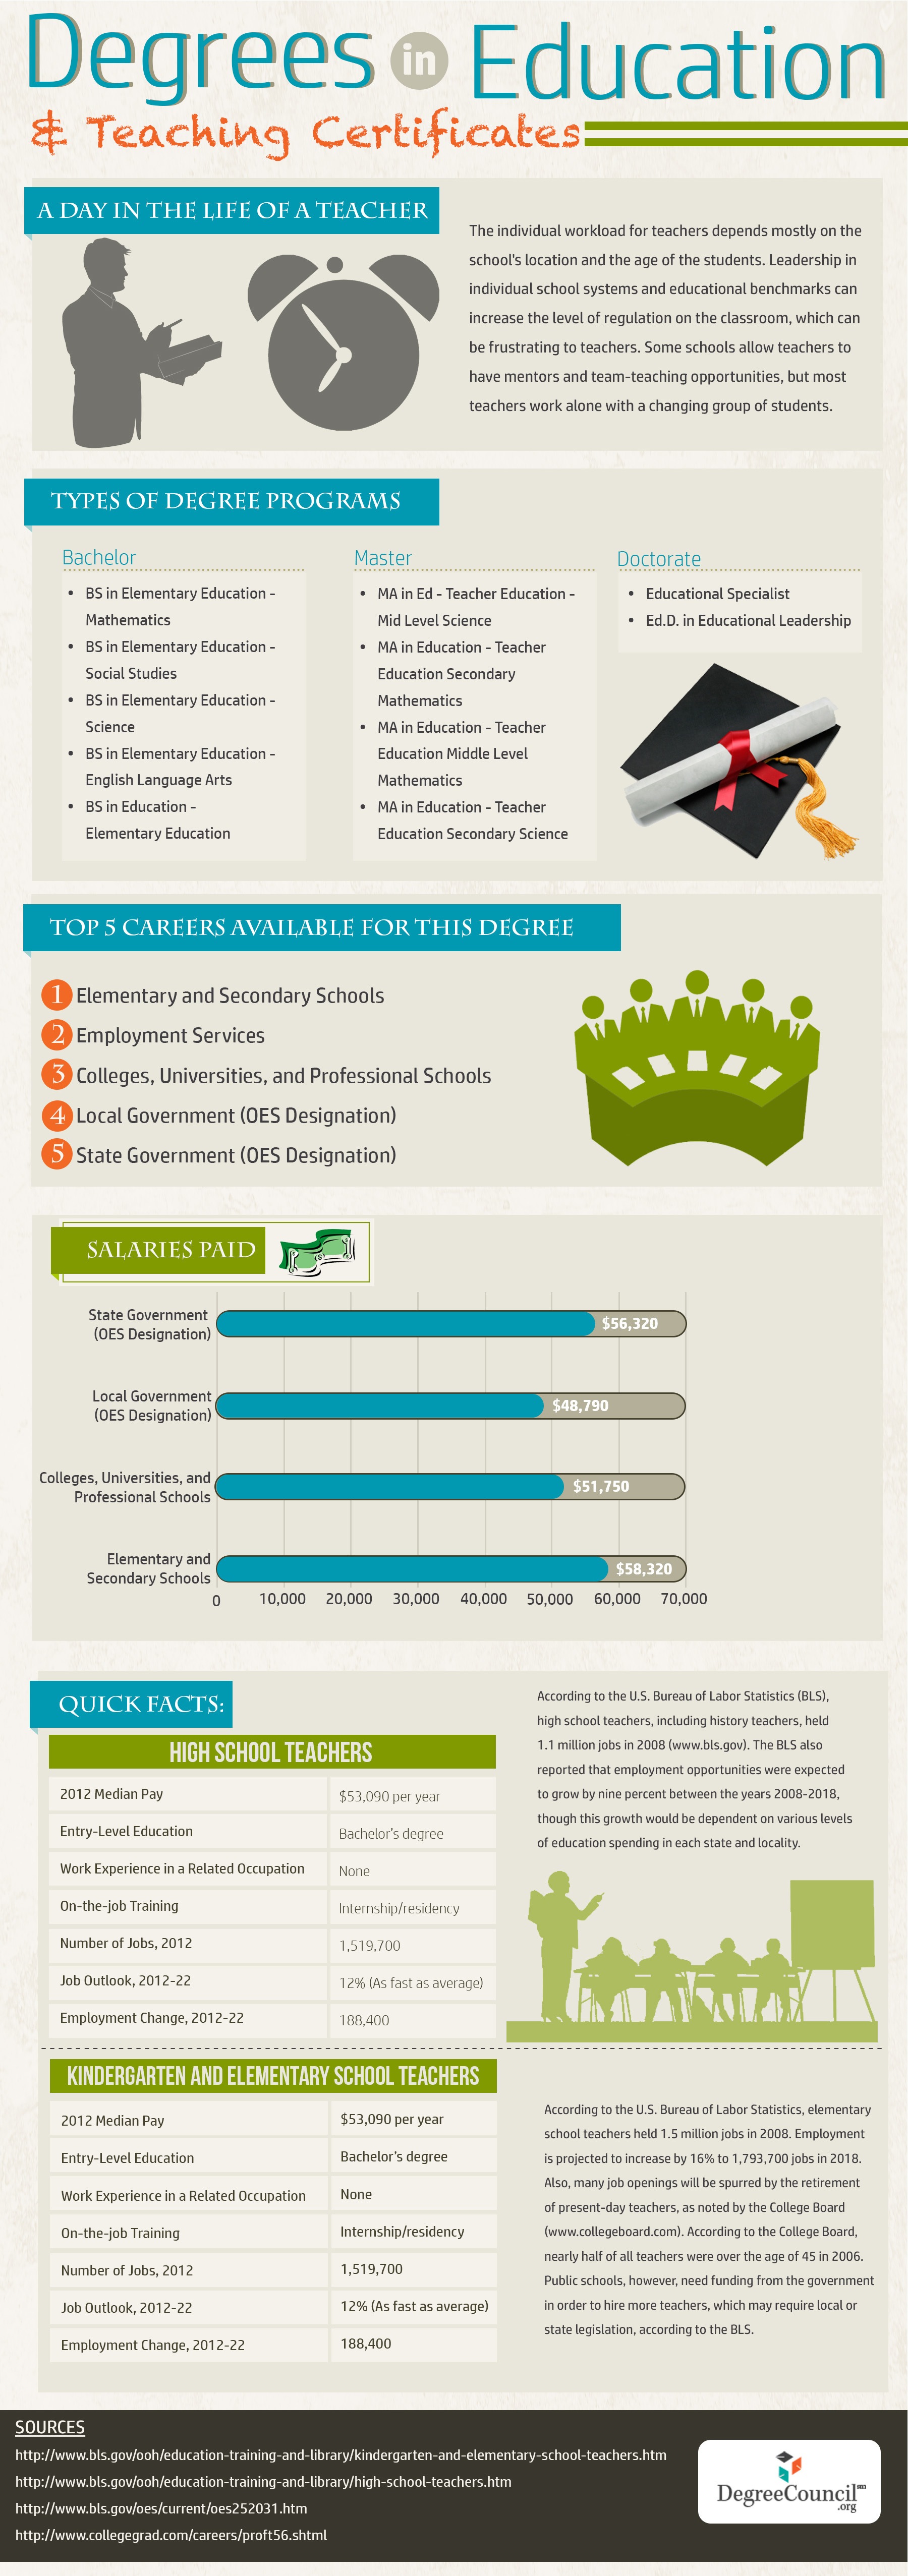 Degrees in Education and Teaching Certificates Infographic